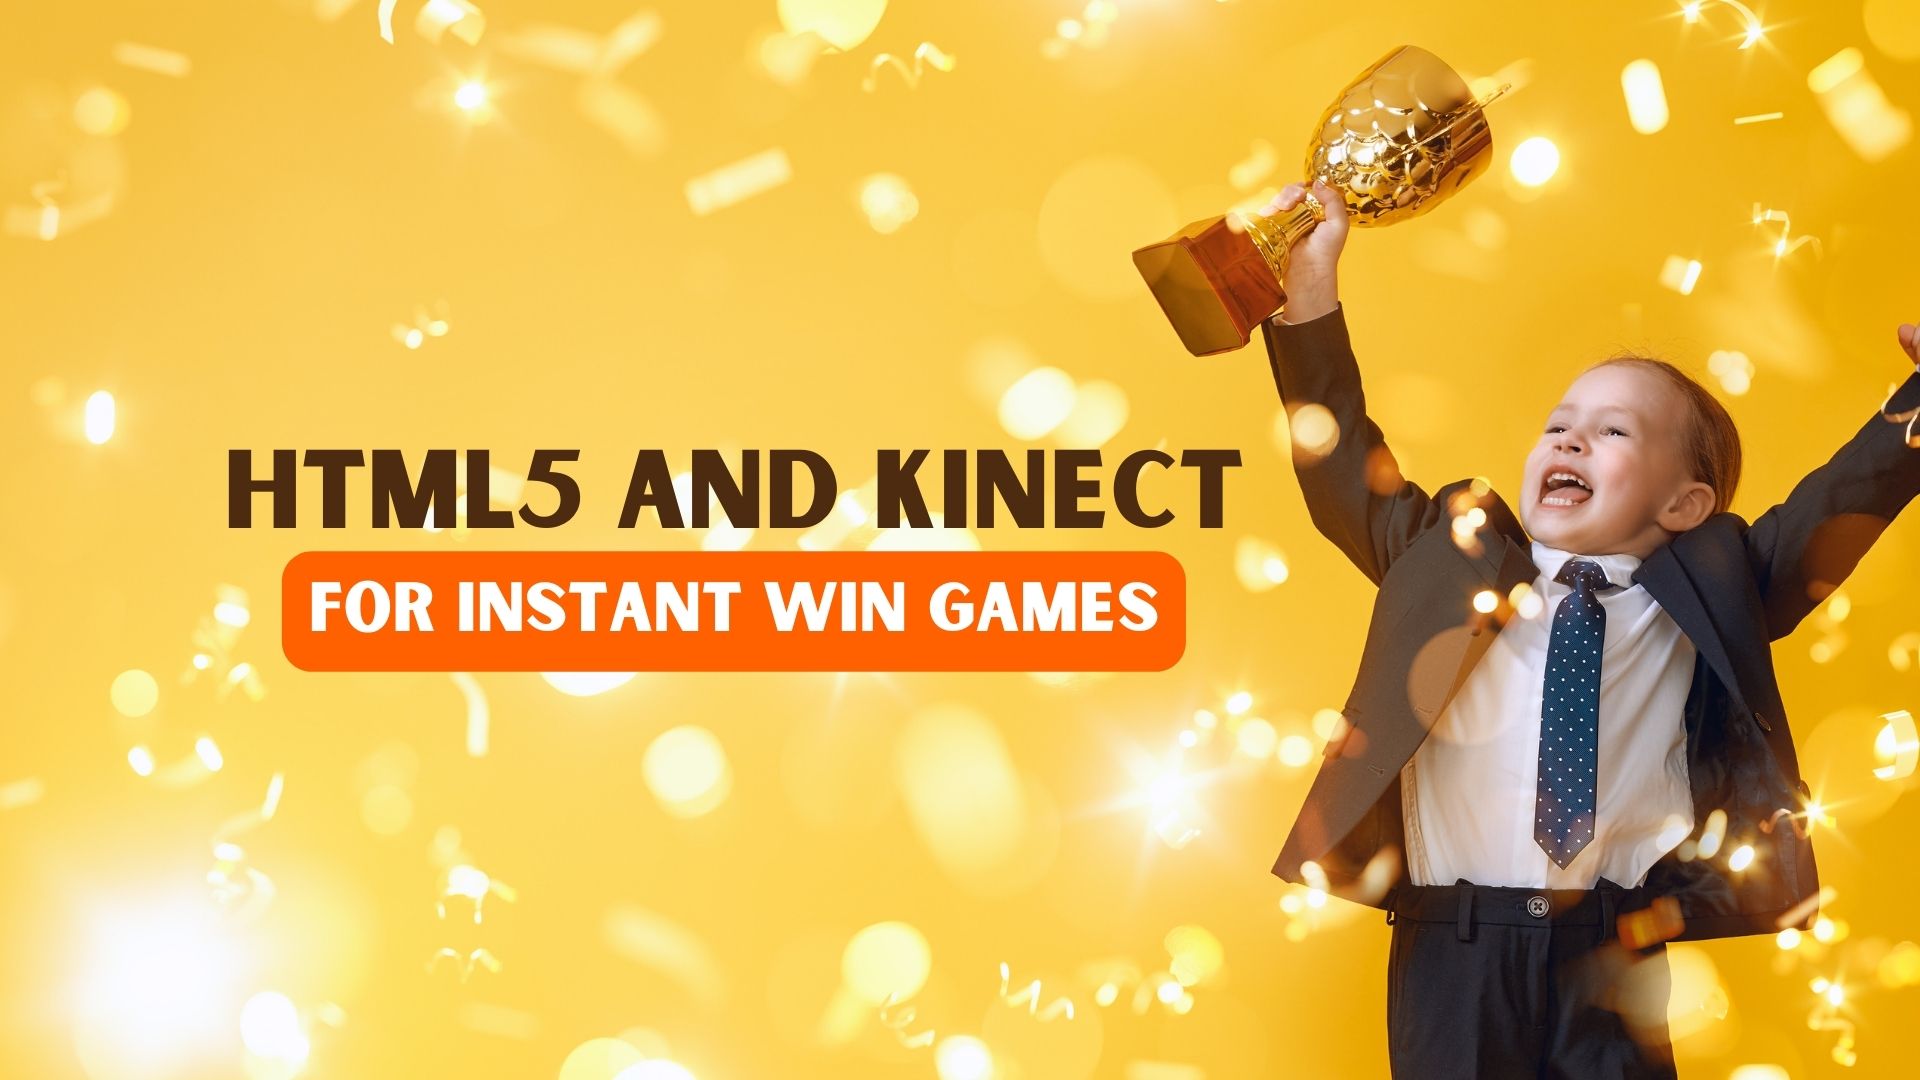 HTML5 and Kinect for Instant Win Games